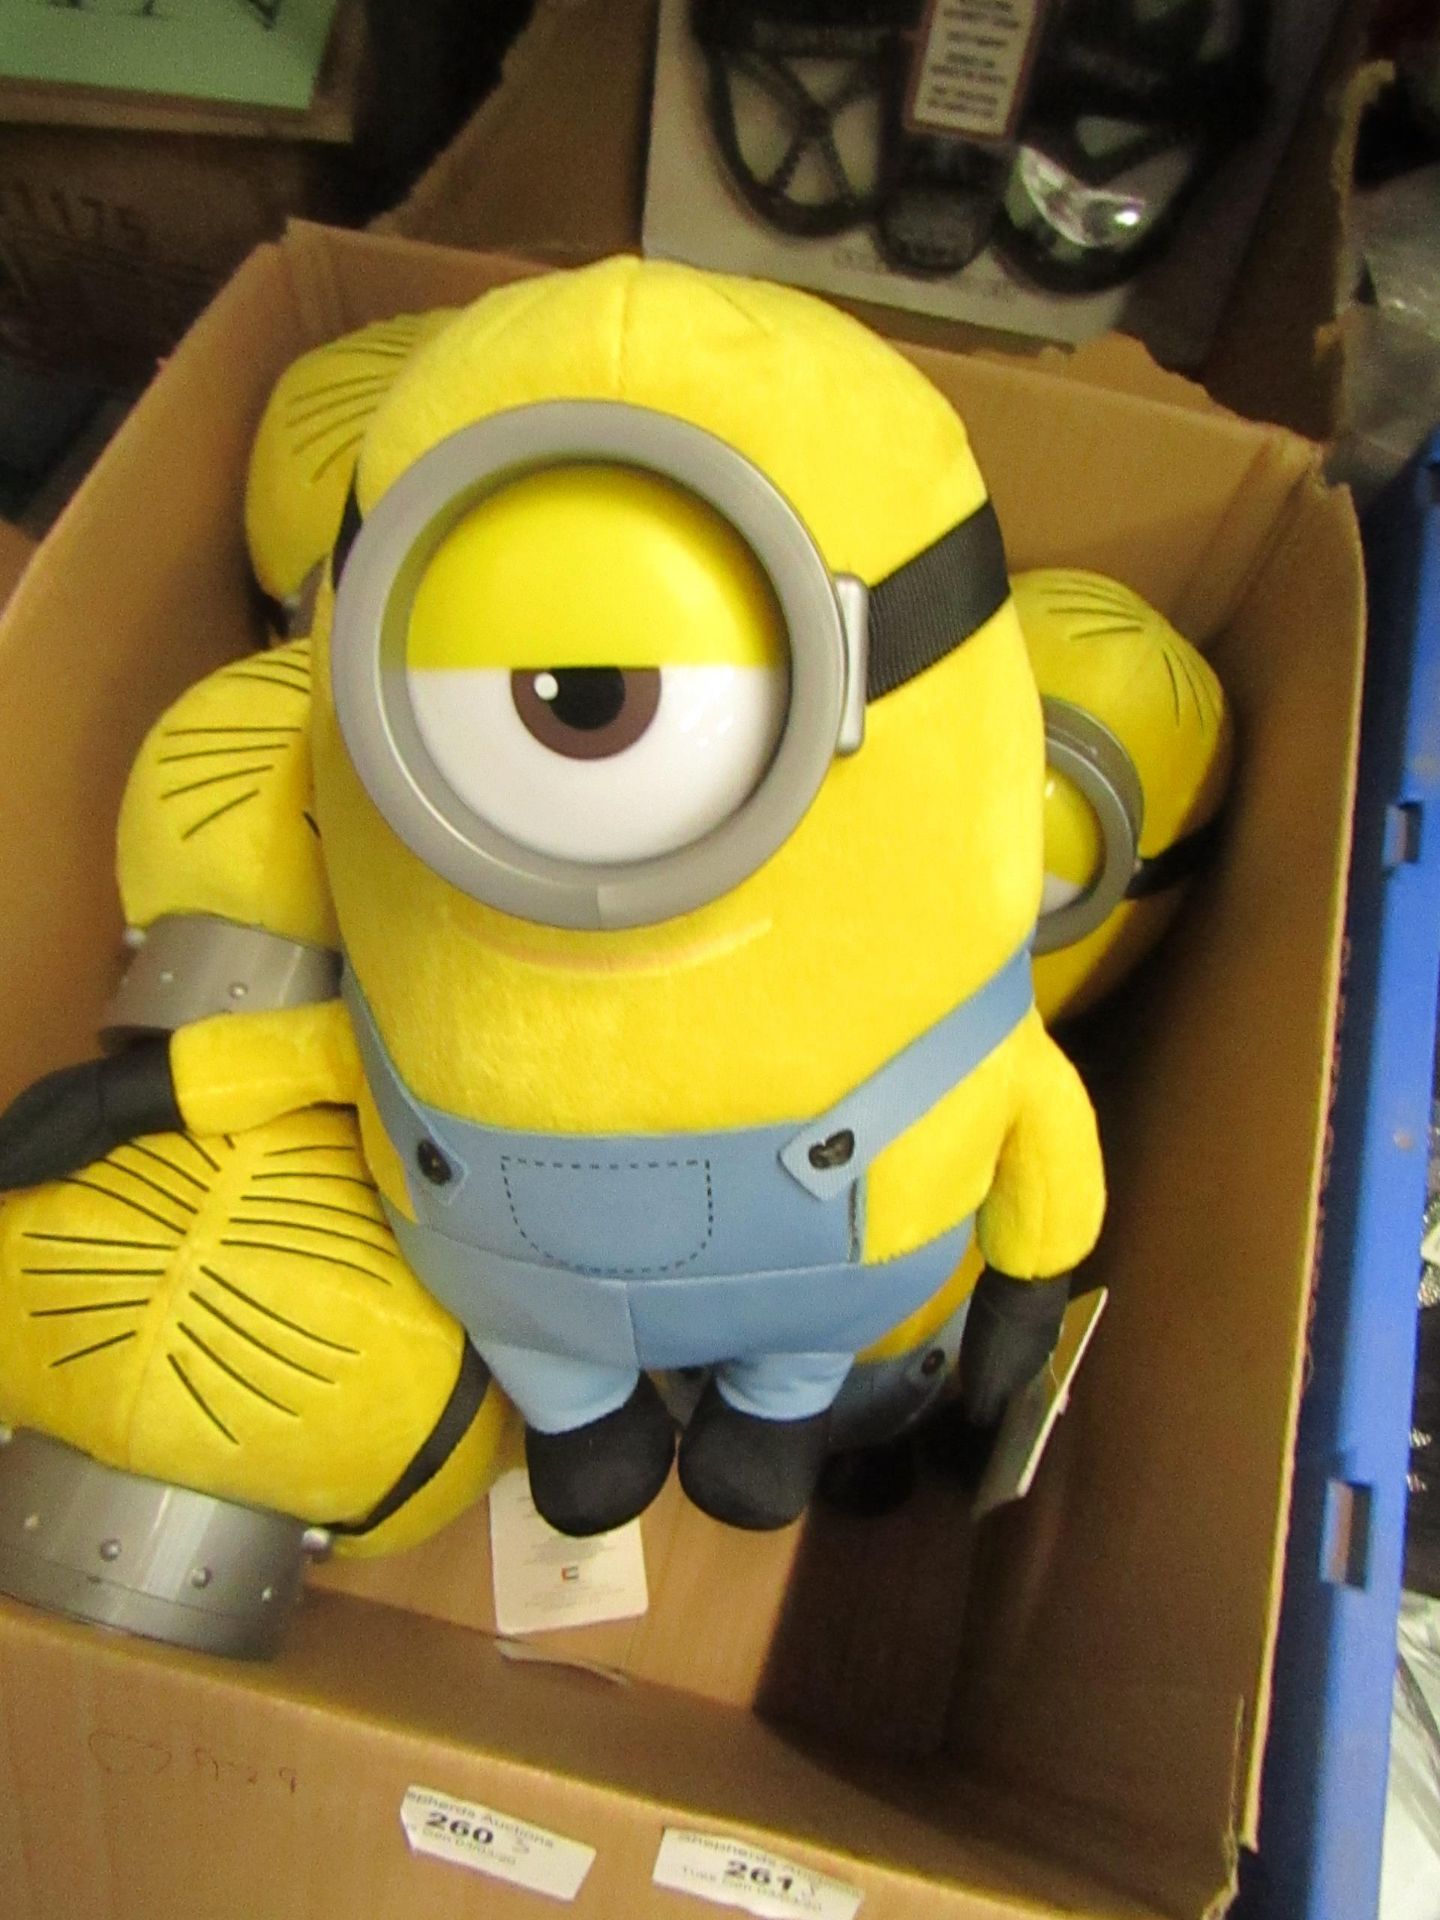 3x Despicable Me minion teddy, new with tag.